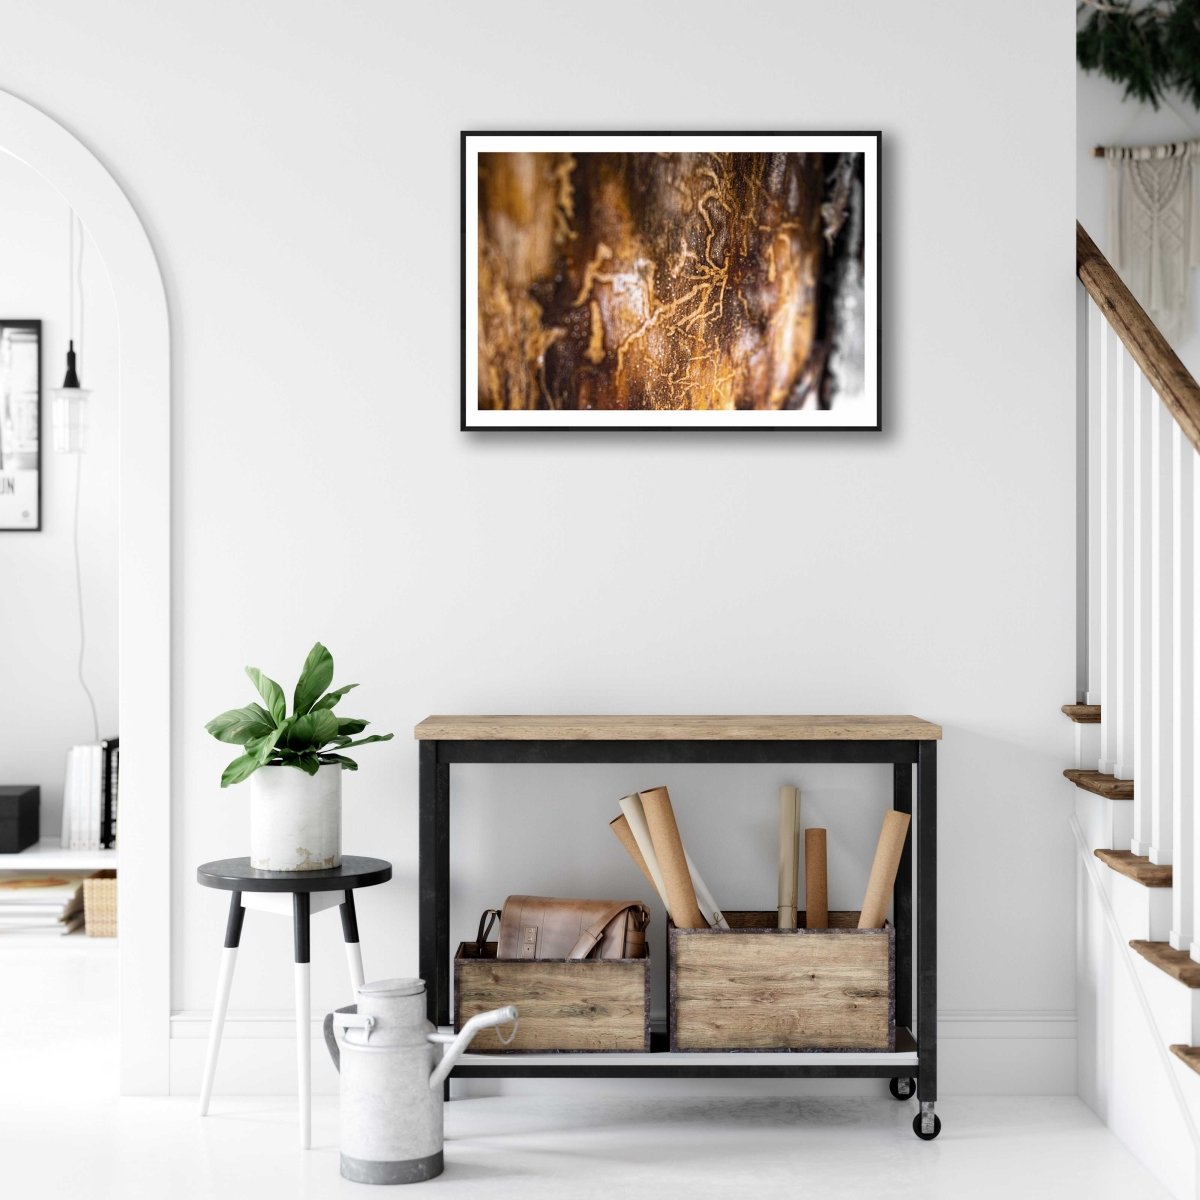 Framed art print of a close-up tilt-shift image of bark beetle tracks, on a white wall above a small desk in a living room.